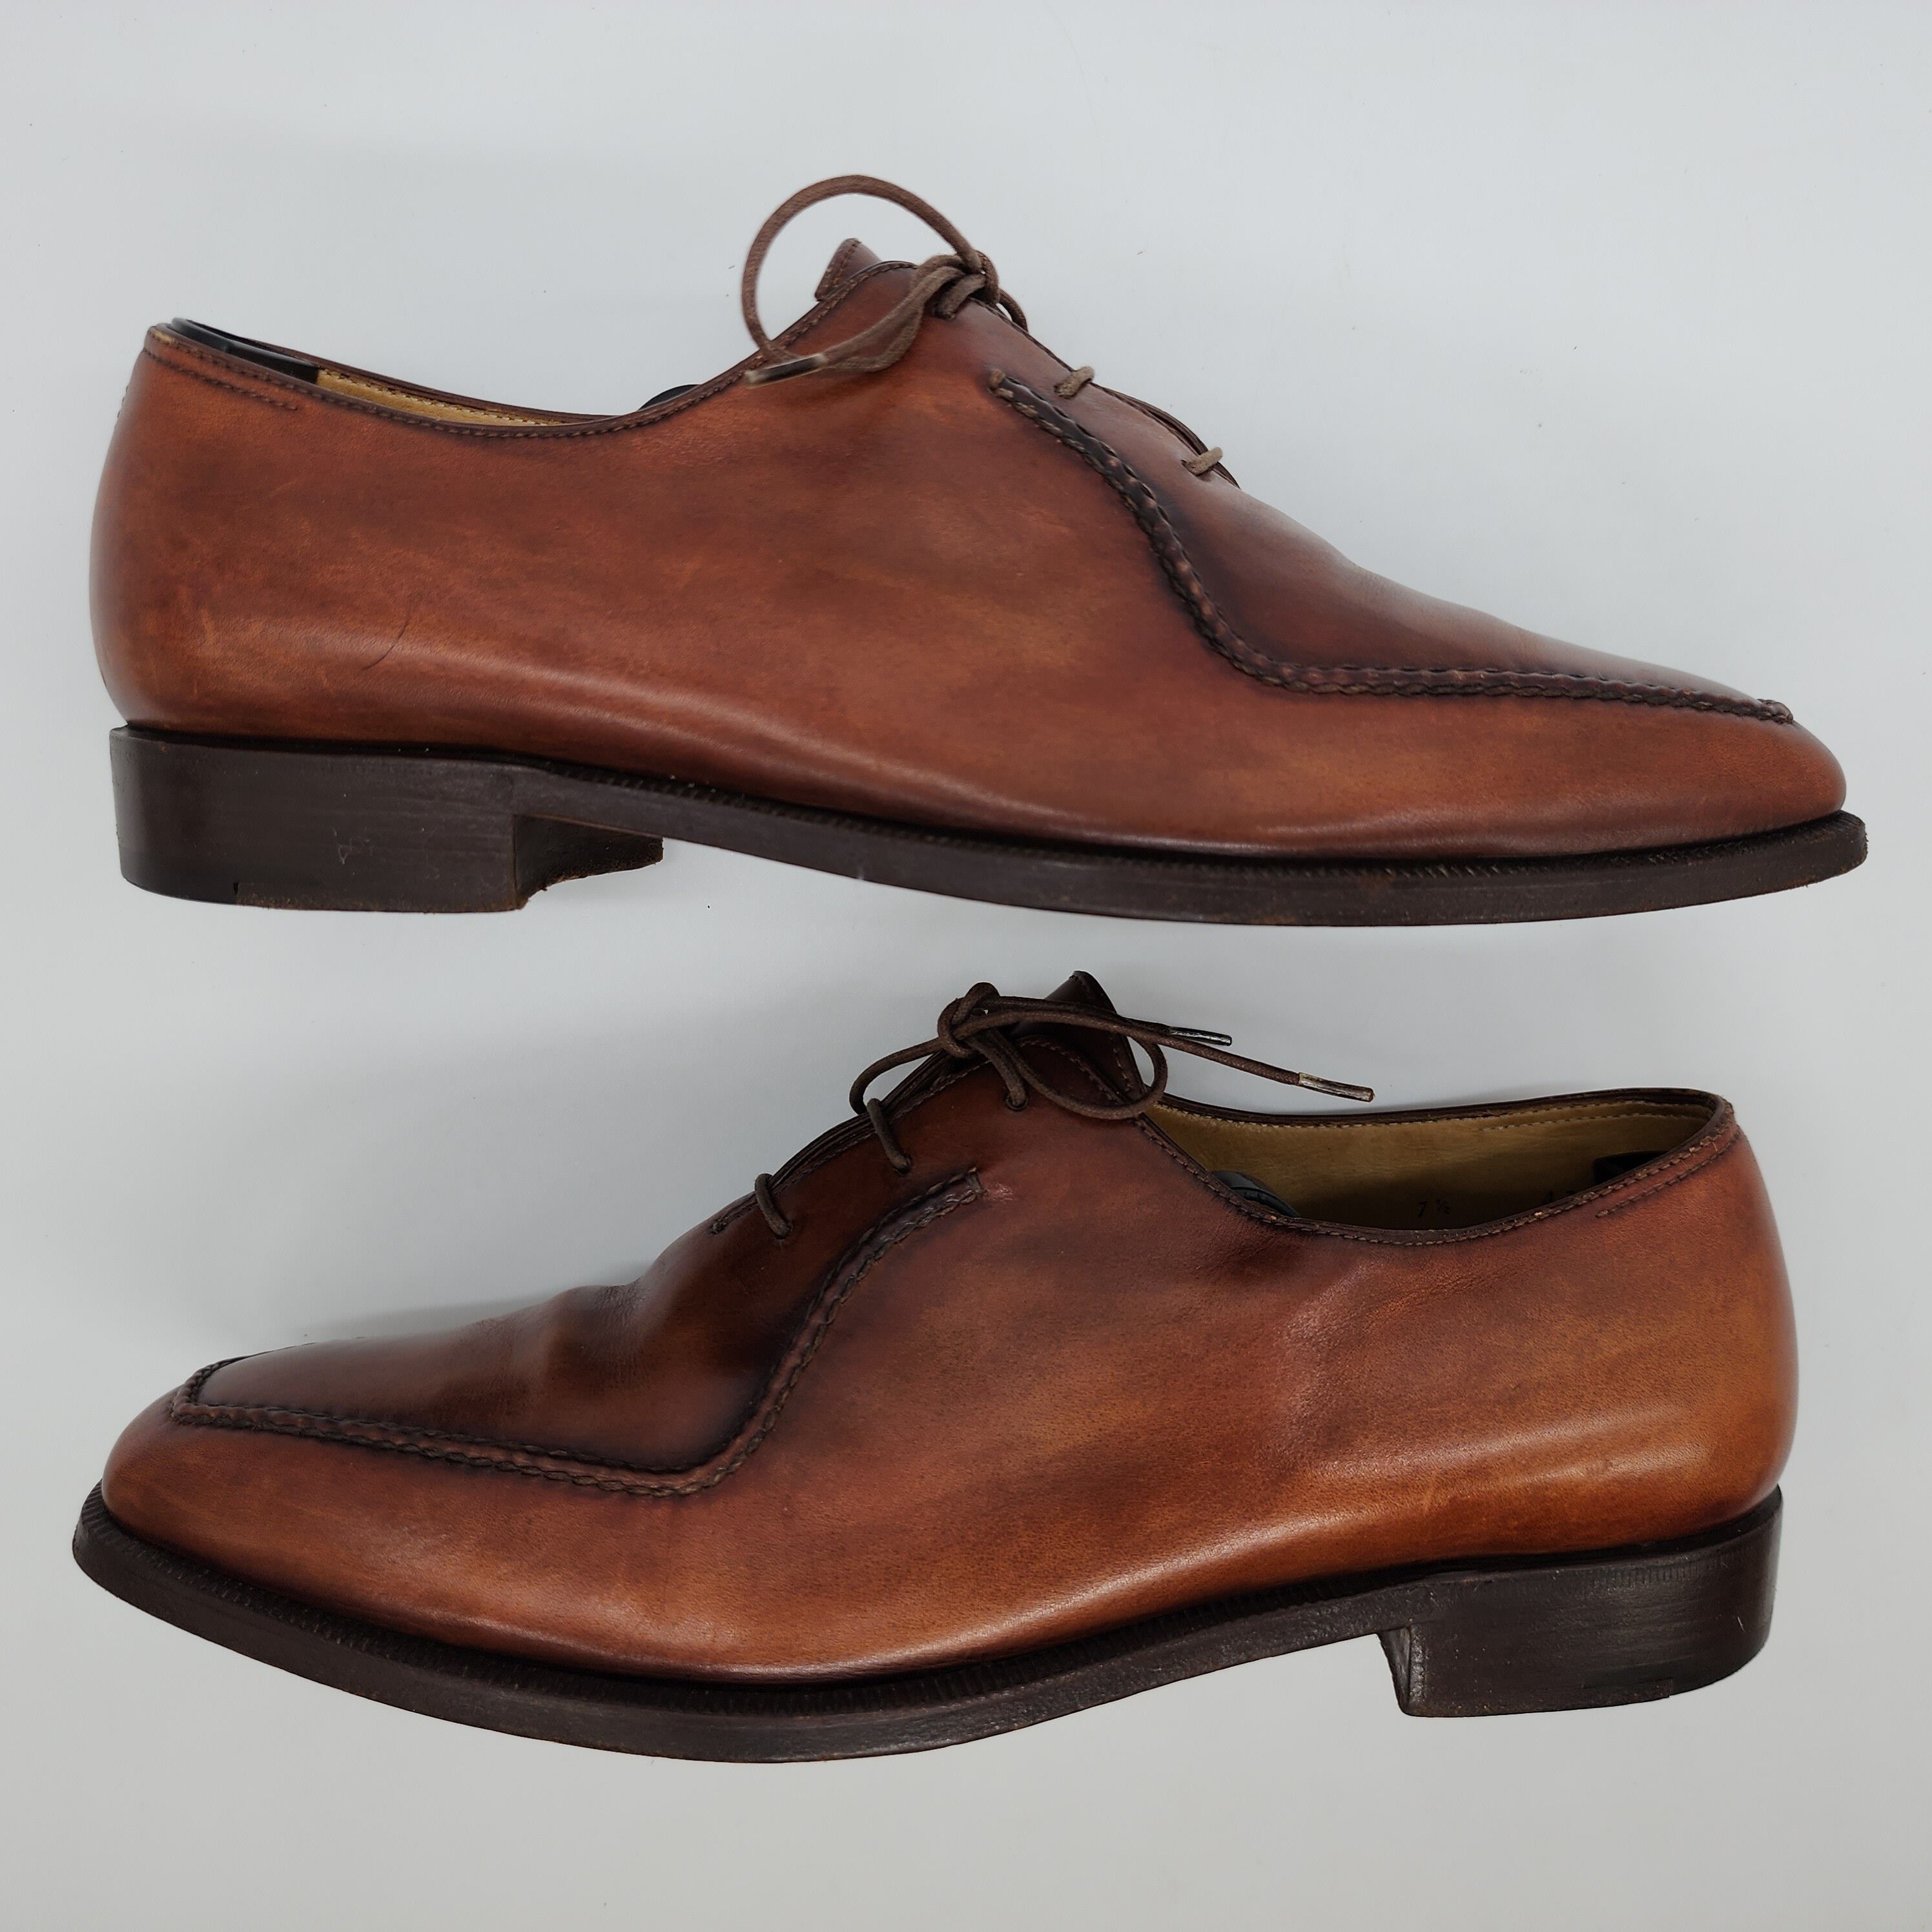 Berluti - Stitched Detail Leather Oxford Shoes - 5